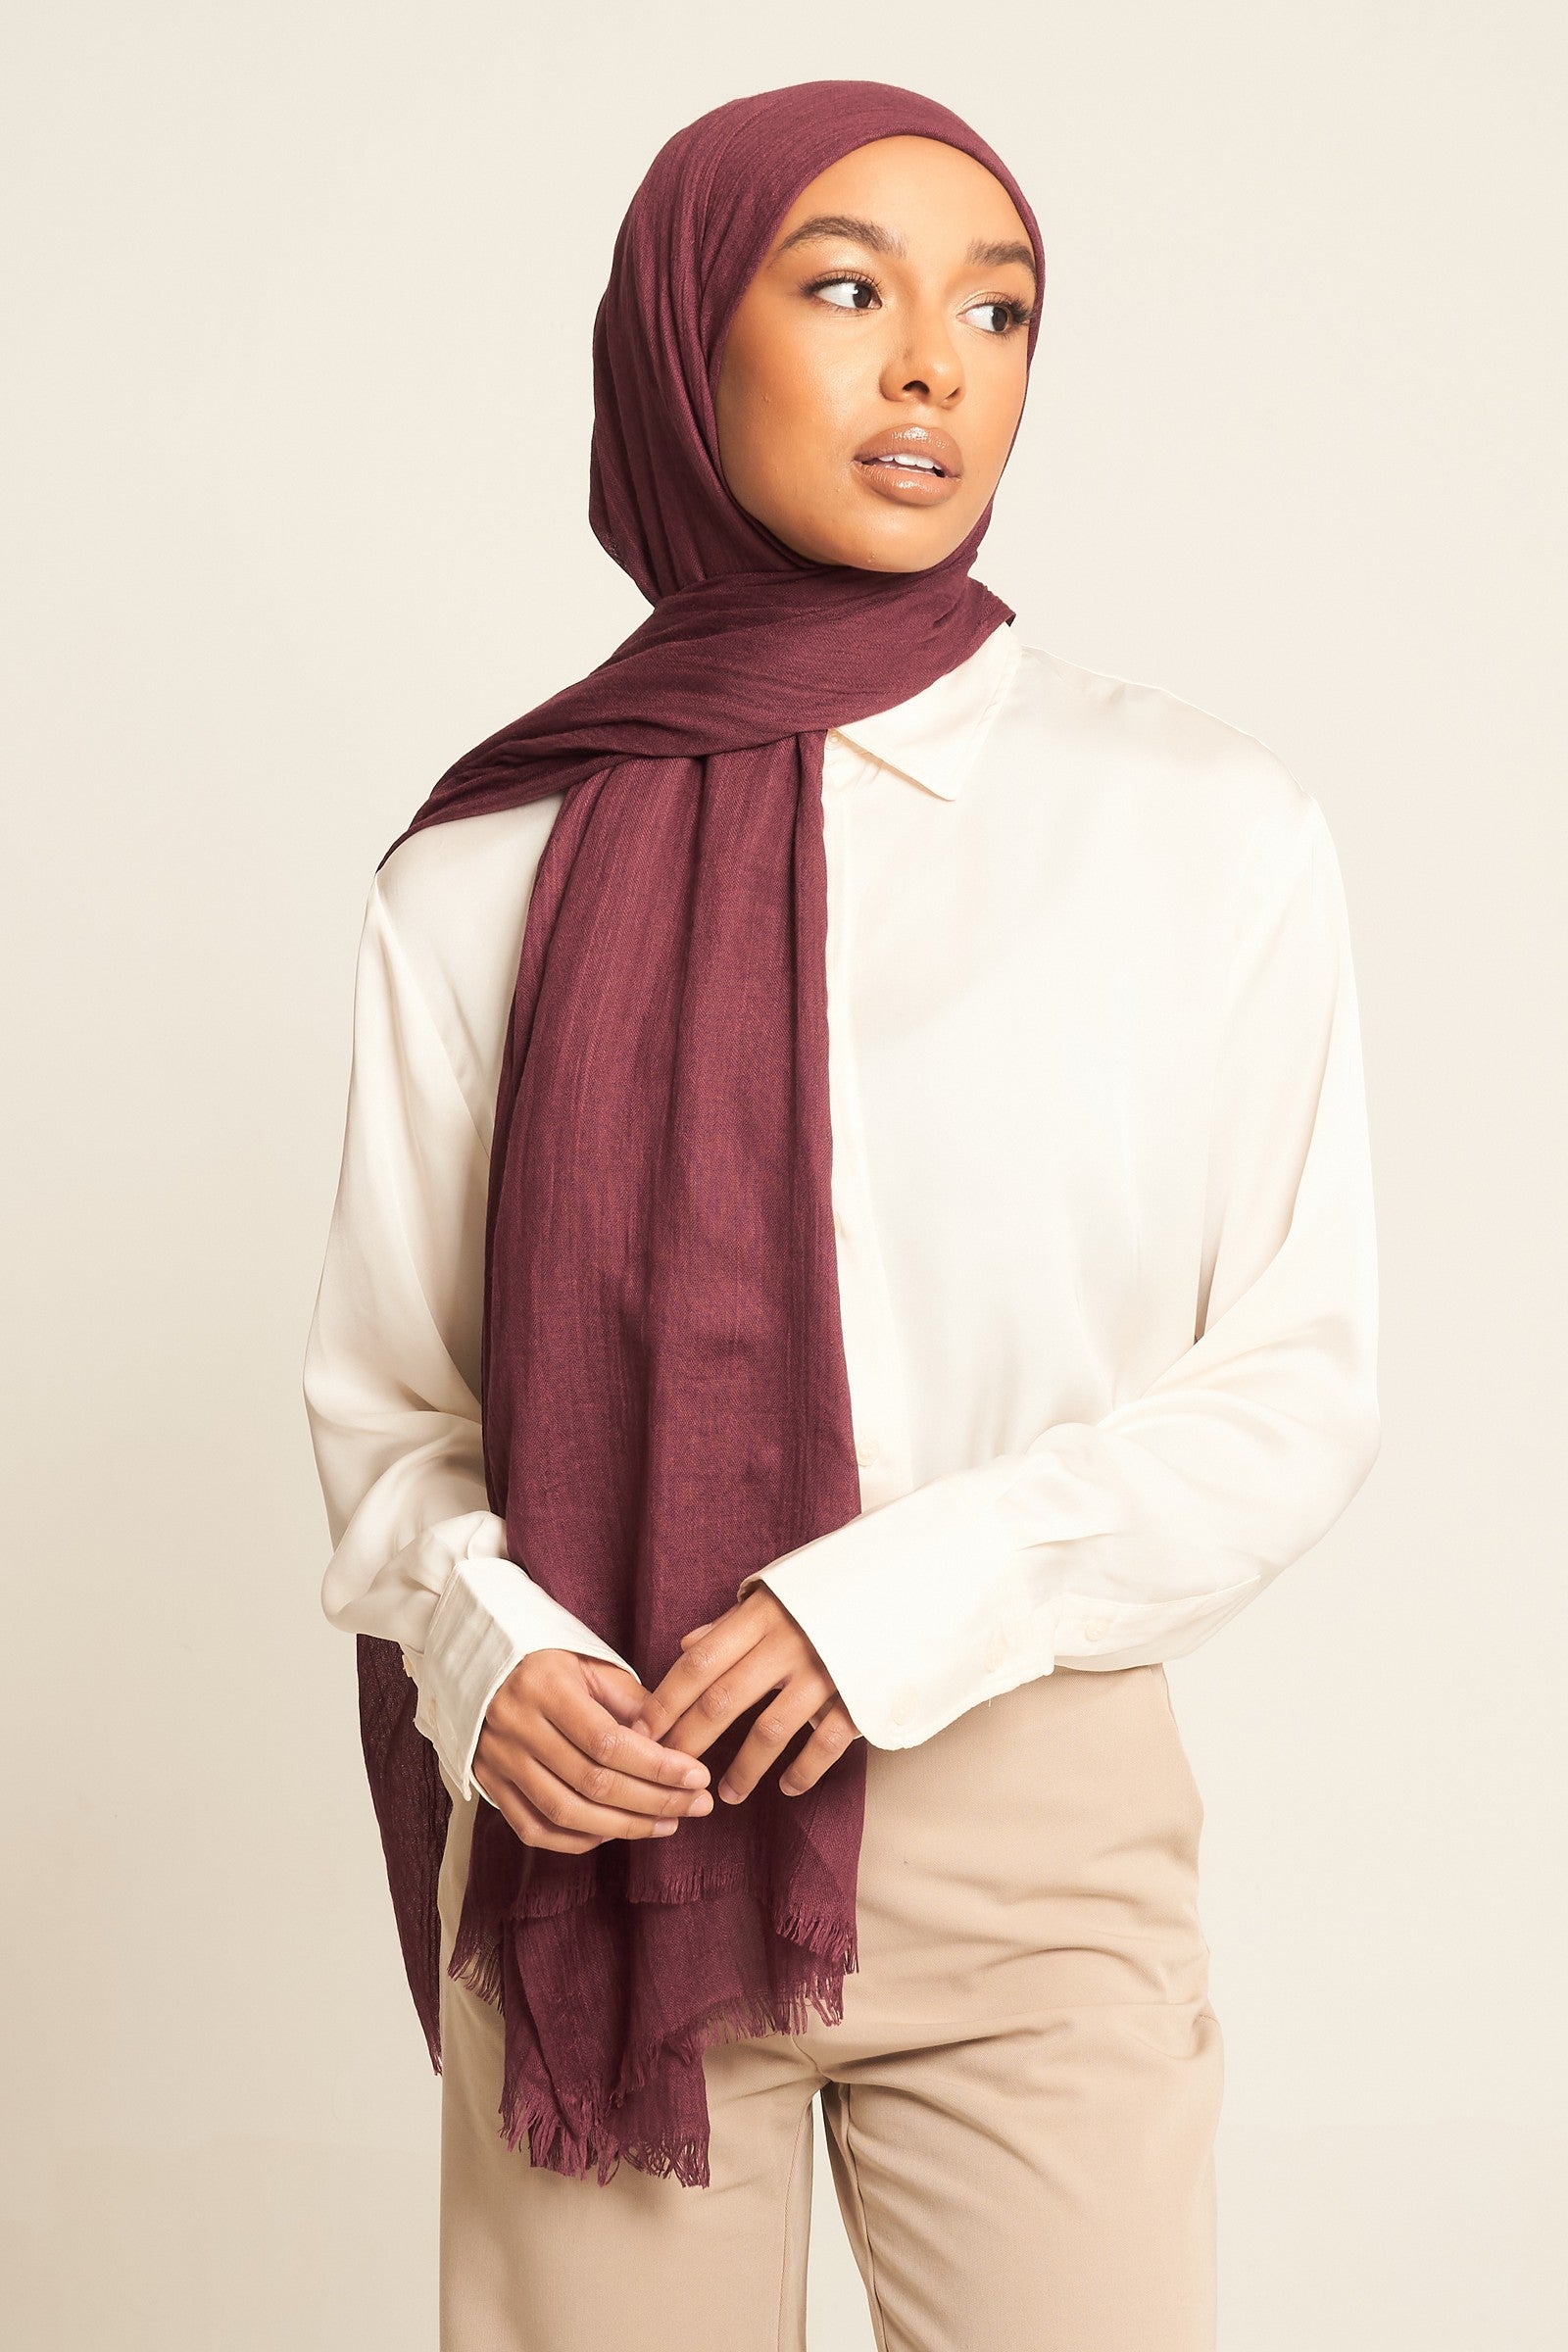 Currant Red | Luxury Cotton Modal Hijab